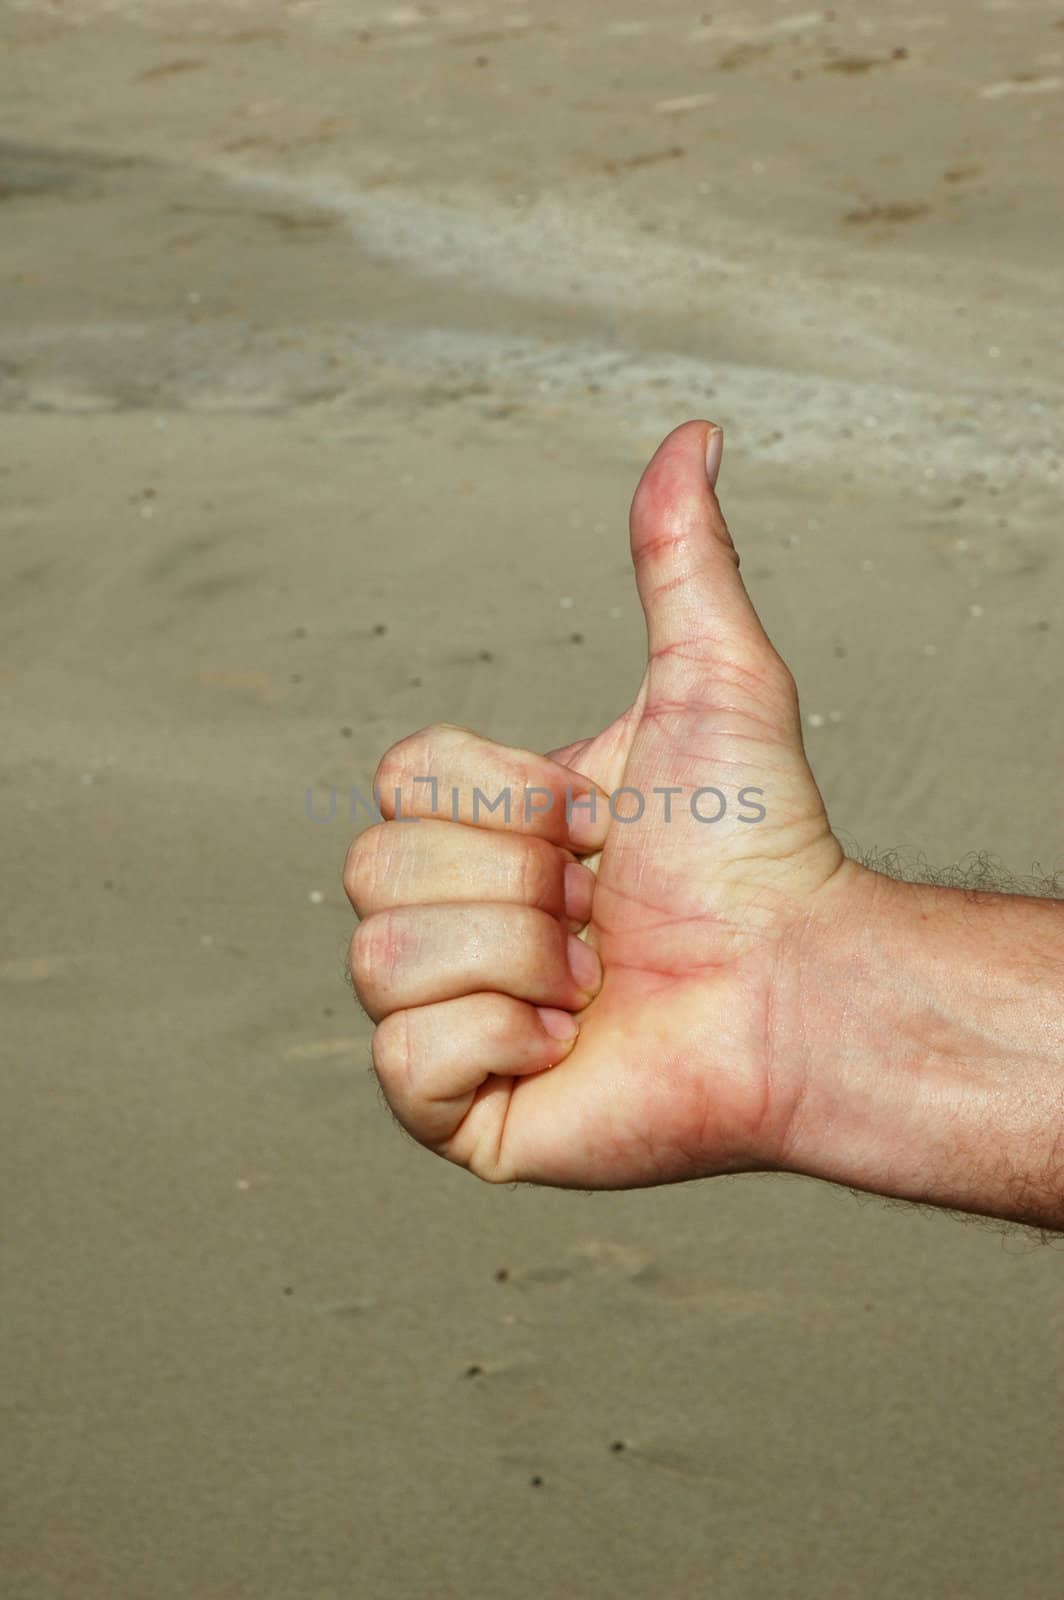 Thumb's up sign gesturing let's go against sandy beach background